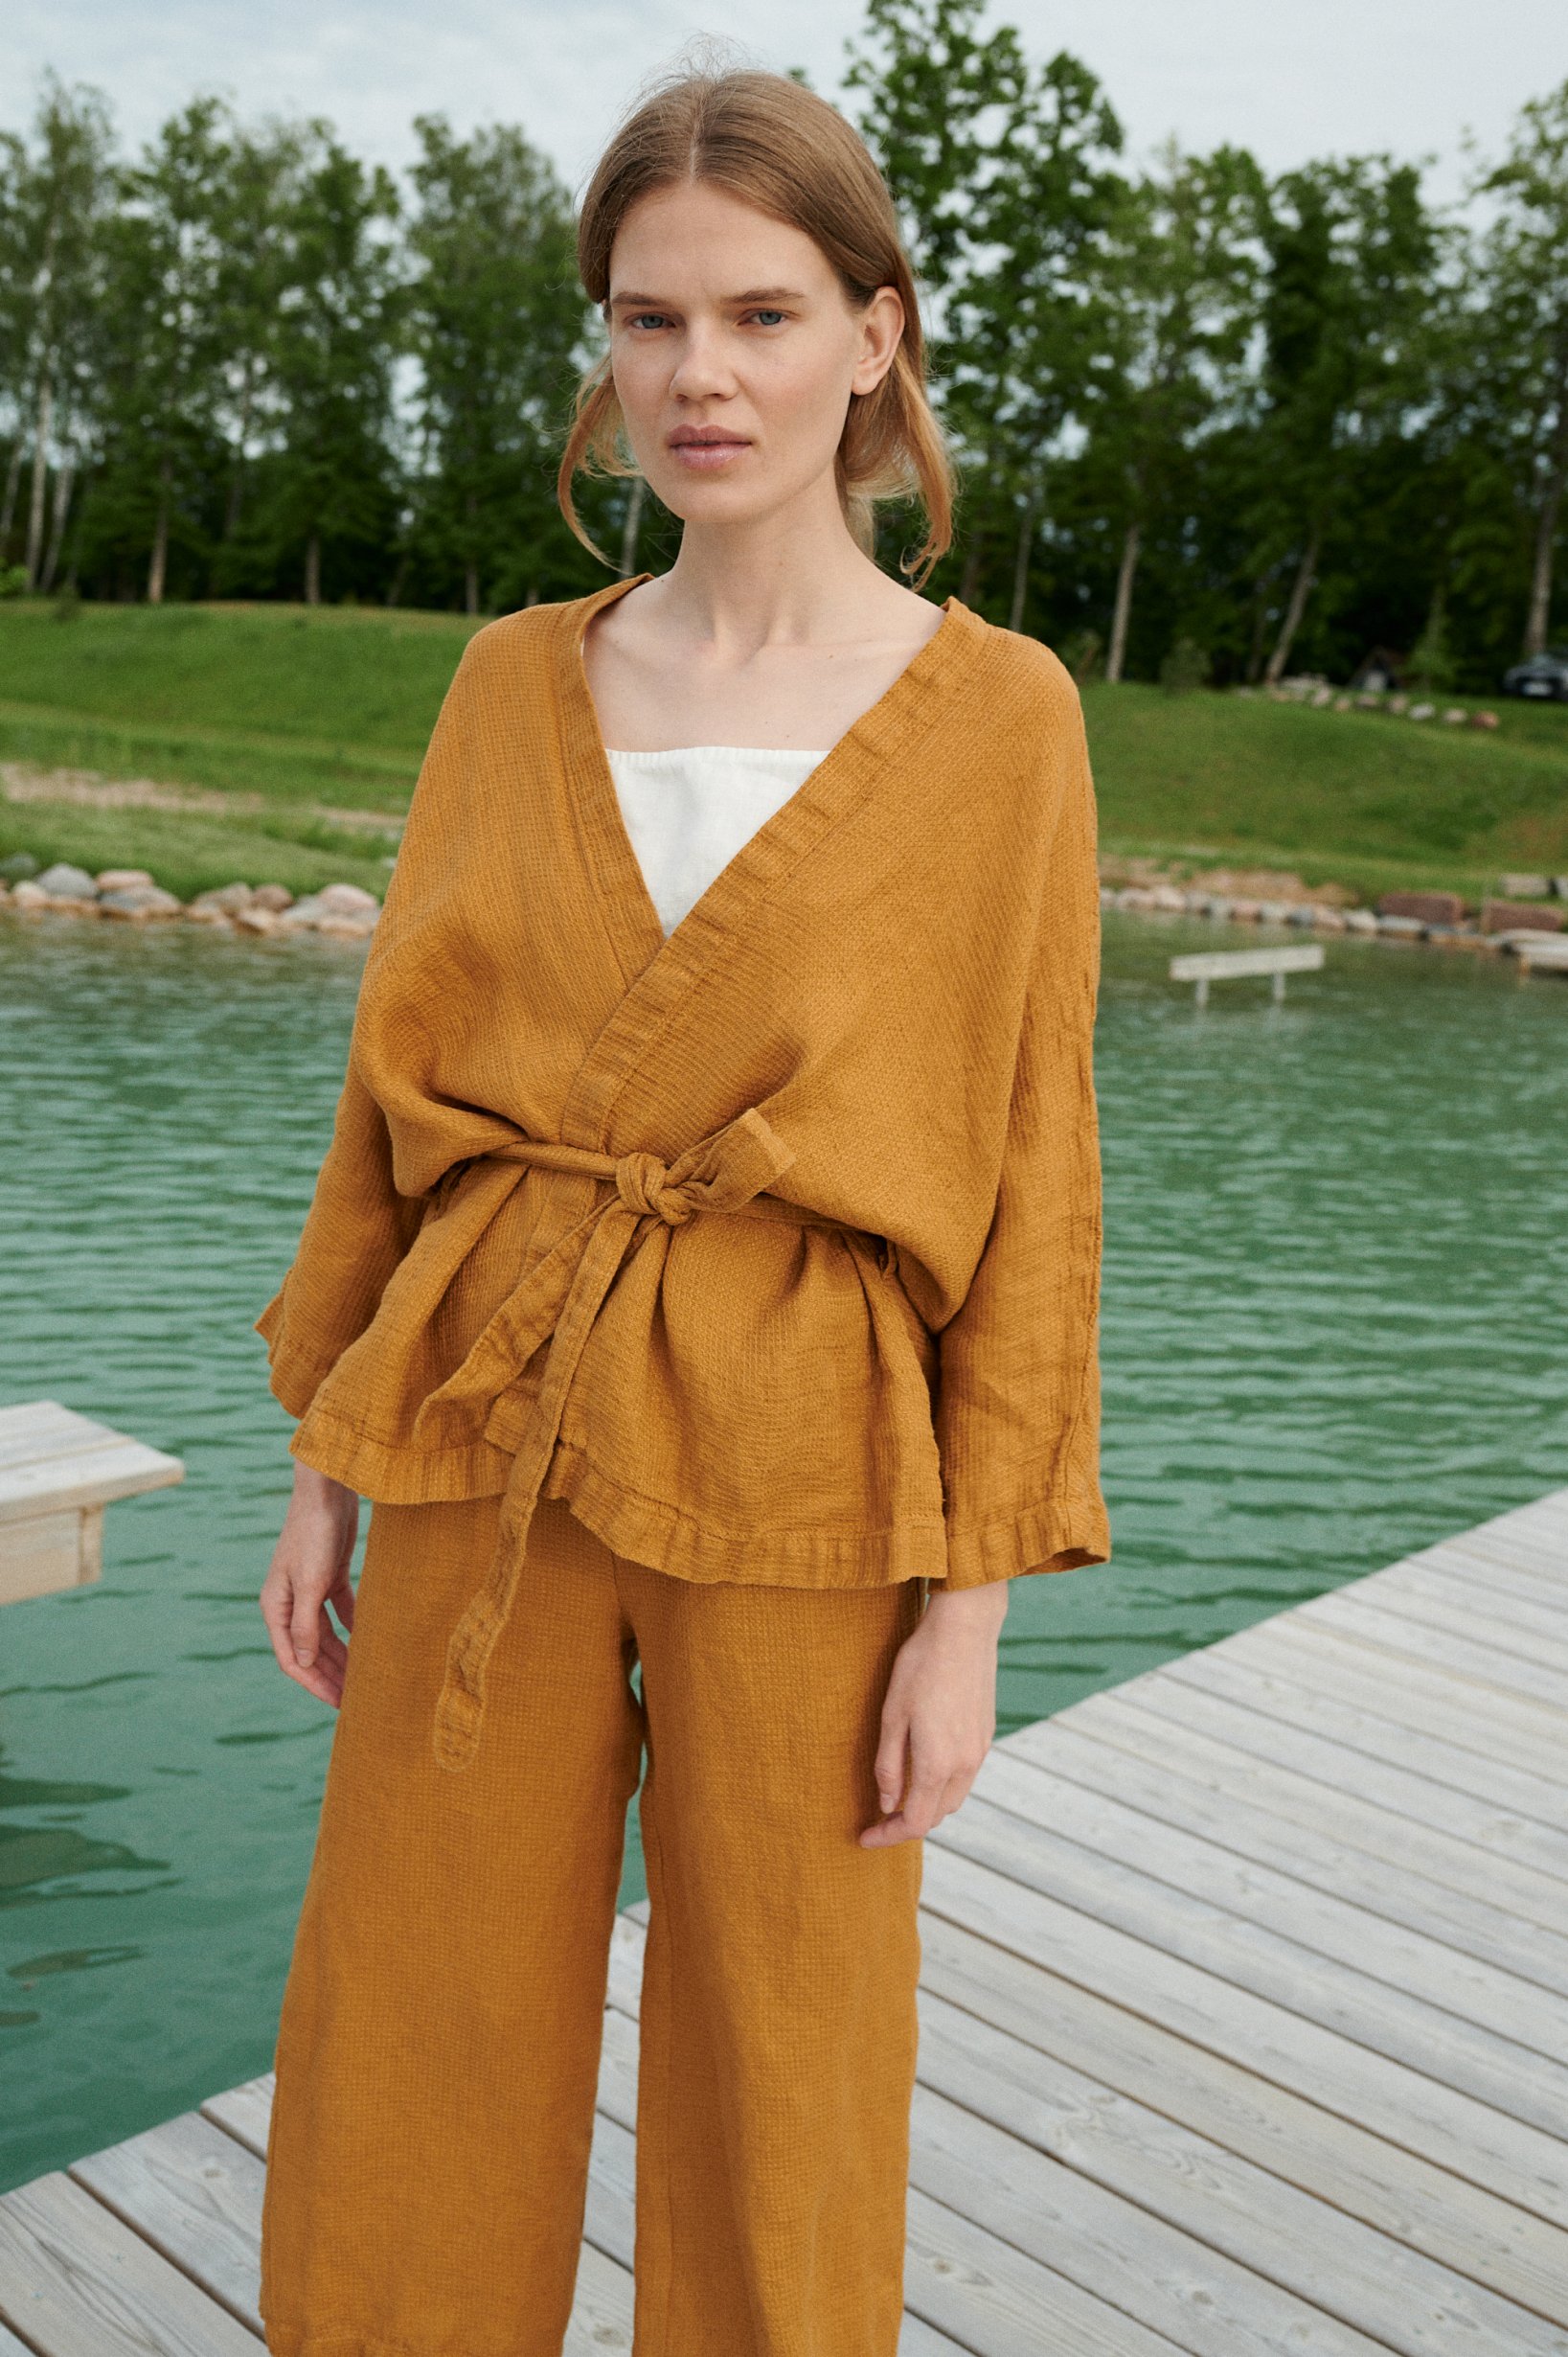 A kimono-style linen jacket worn with a matching belt and wide leg linen trousers